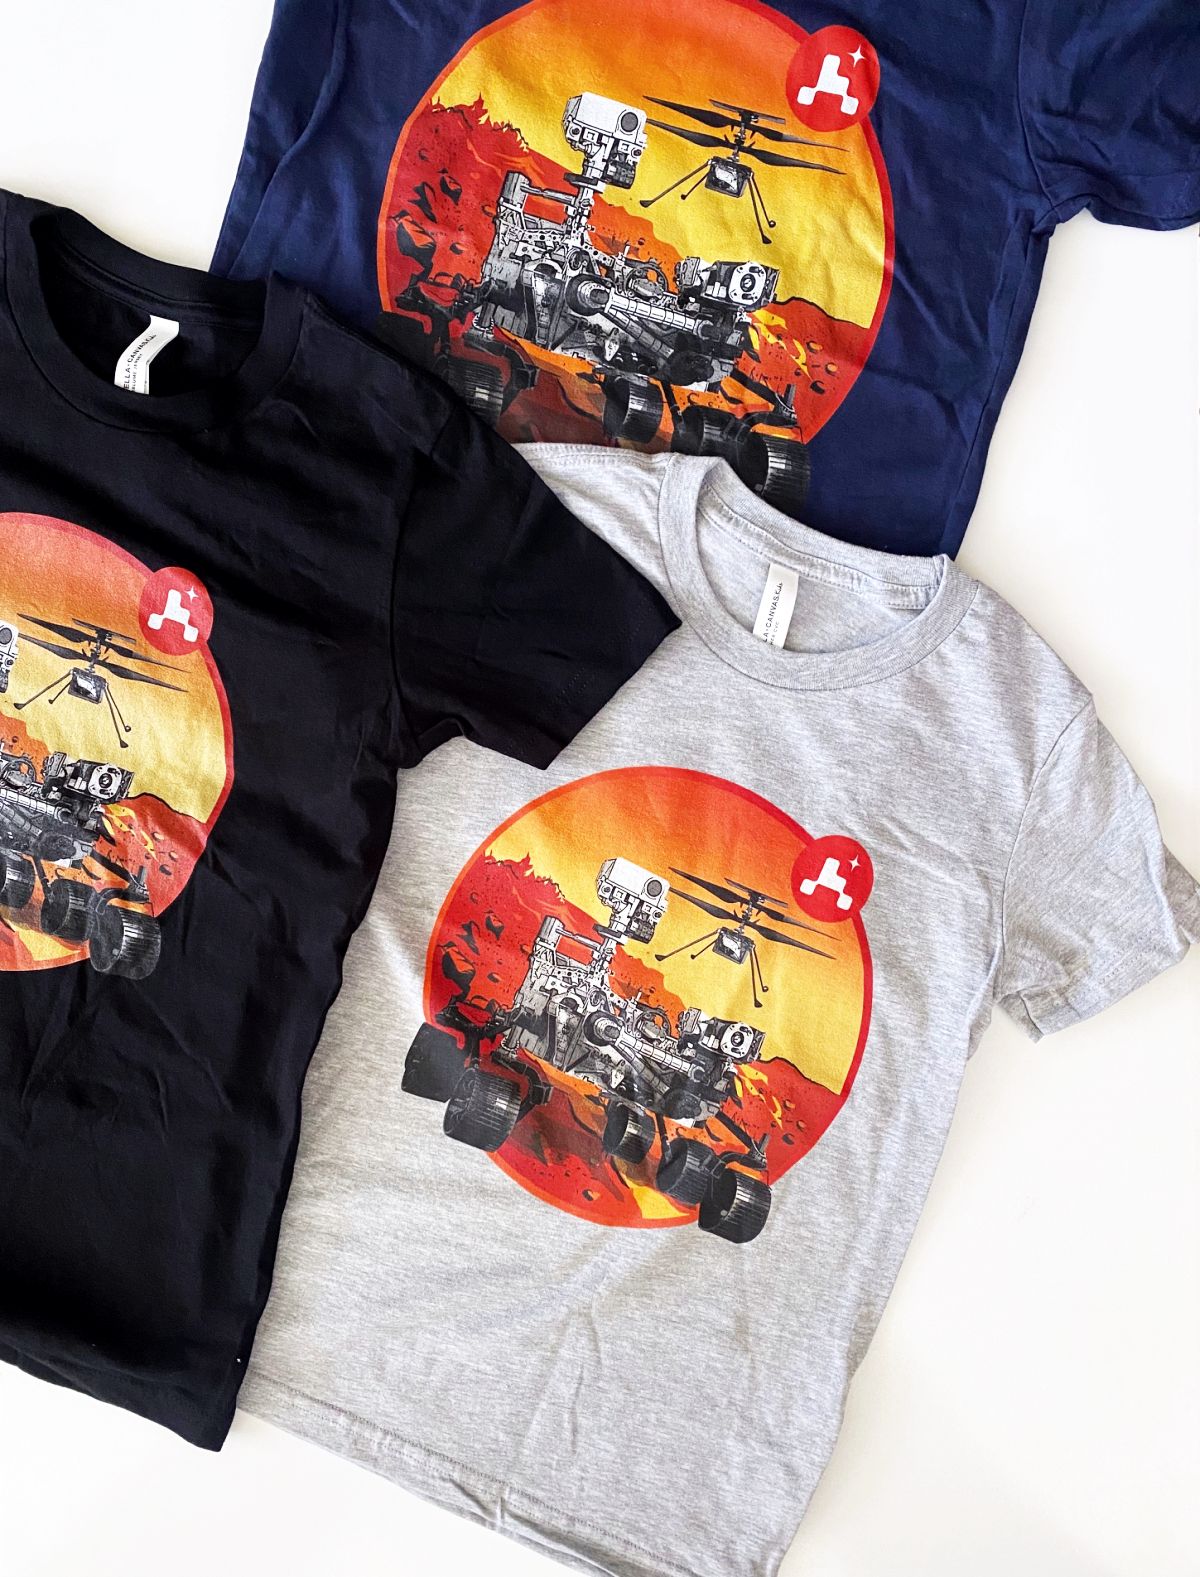 Perseverance Rover  T-Shirt